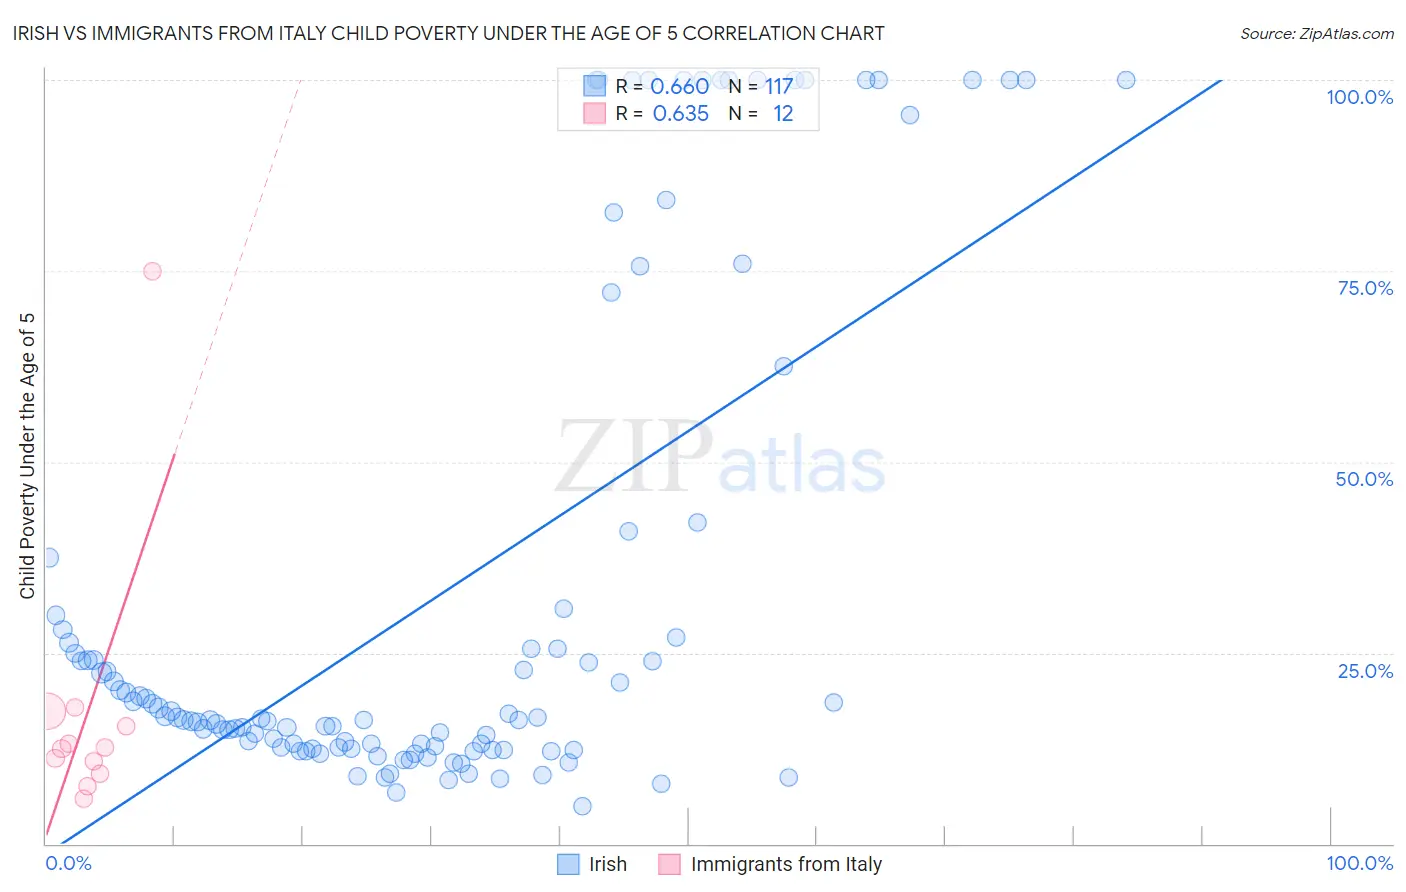 Irish vs Immigrants from Italy Child Poverty Under the Age of 5